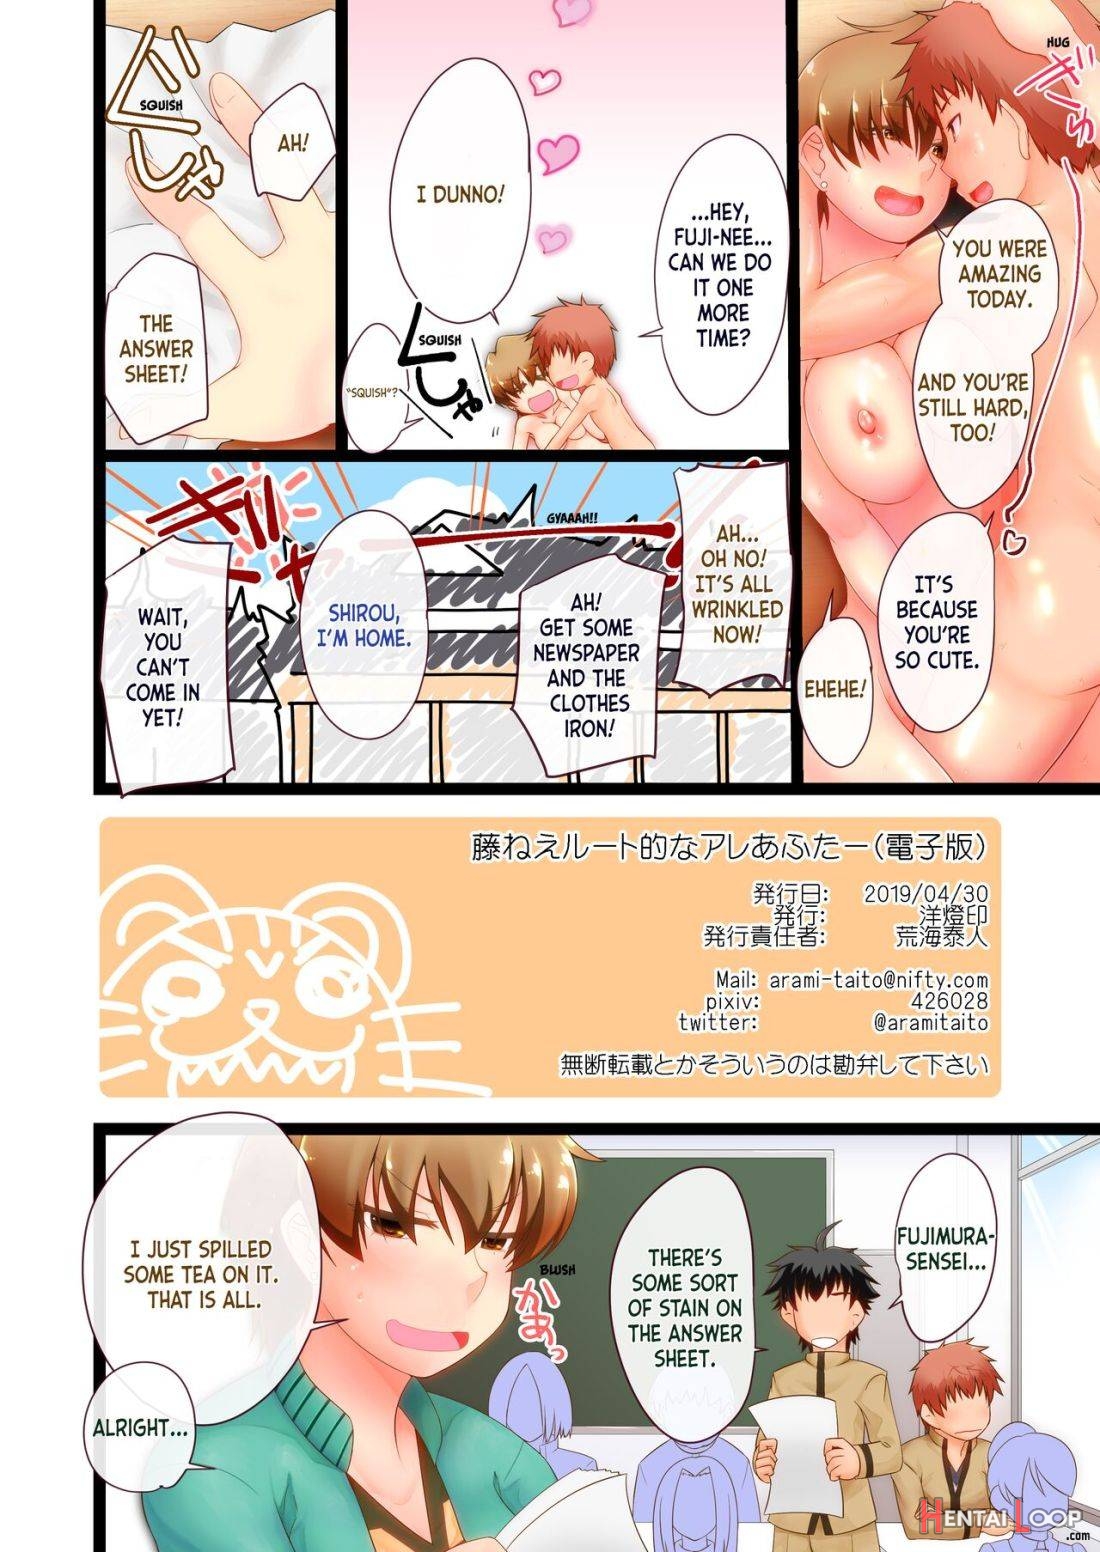 Fuji-nee Route-teki na Are After page 20